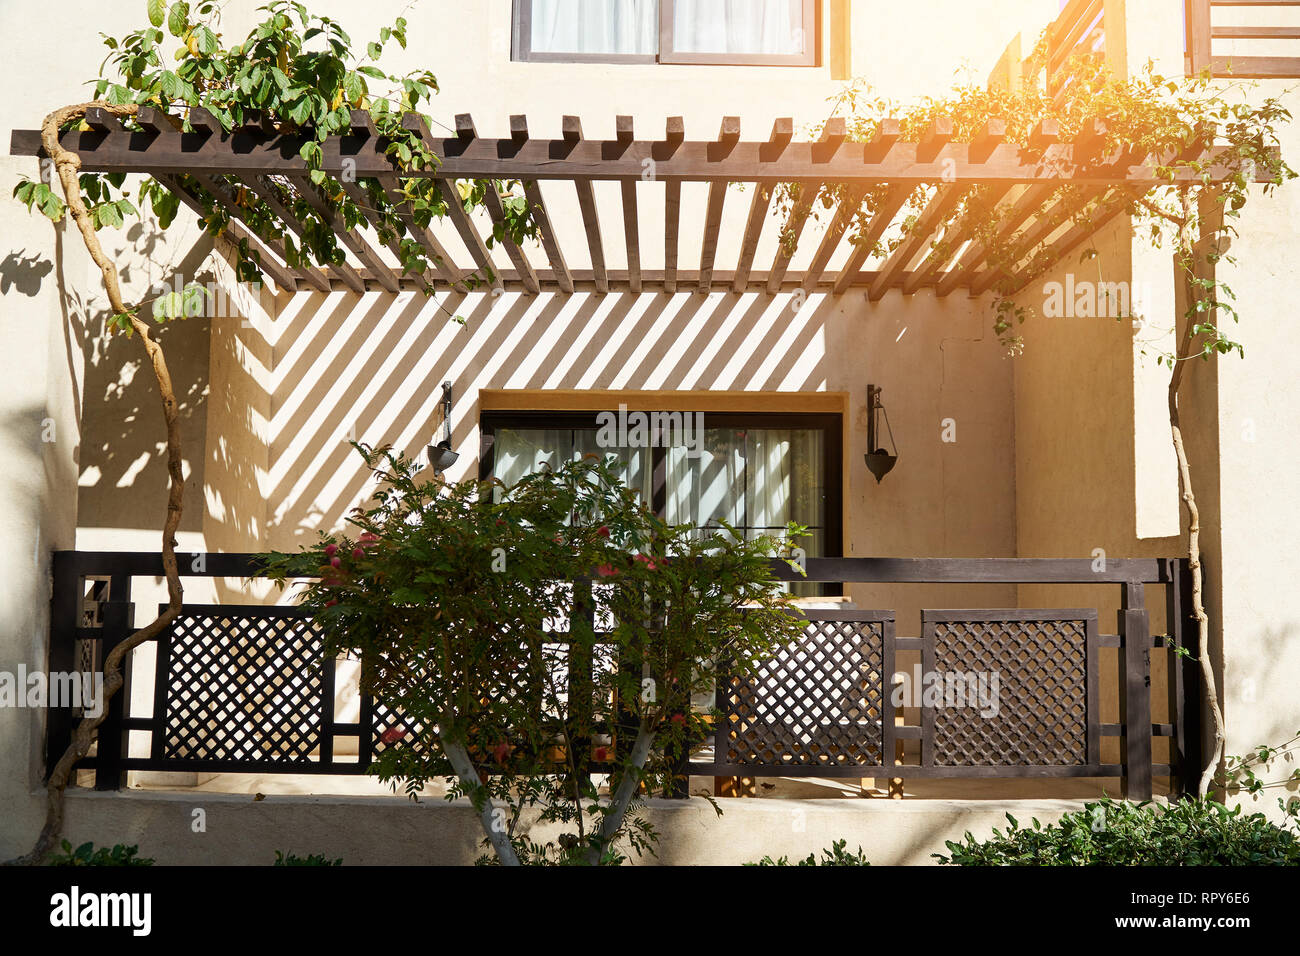 Sharm El Sheikh, Egypt - February 9, 2019: balcony facade of two-storey hotel building in the Arabic style. Tourist resort near the Red Sea. Summer Stock Photo